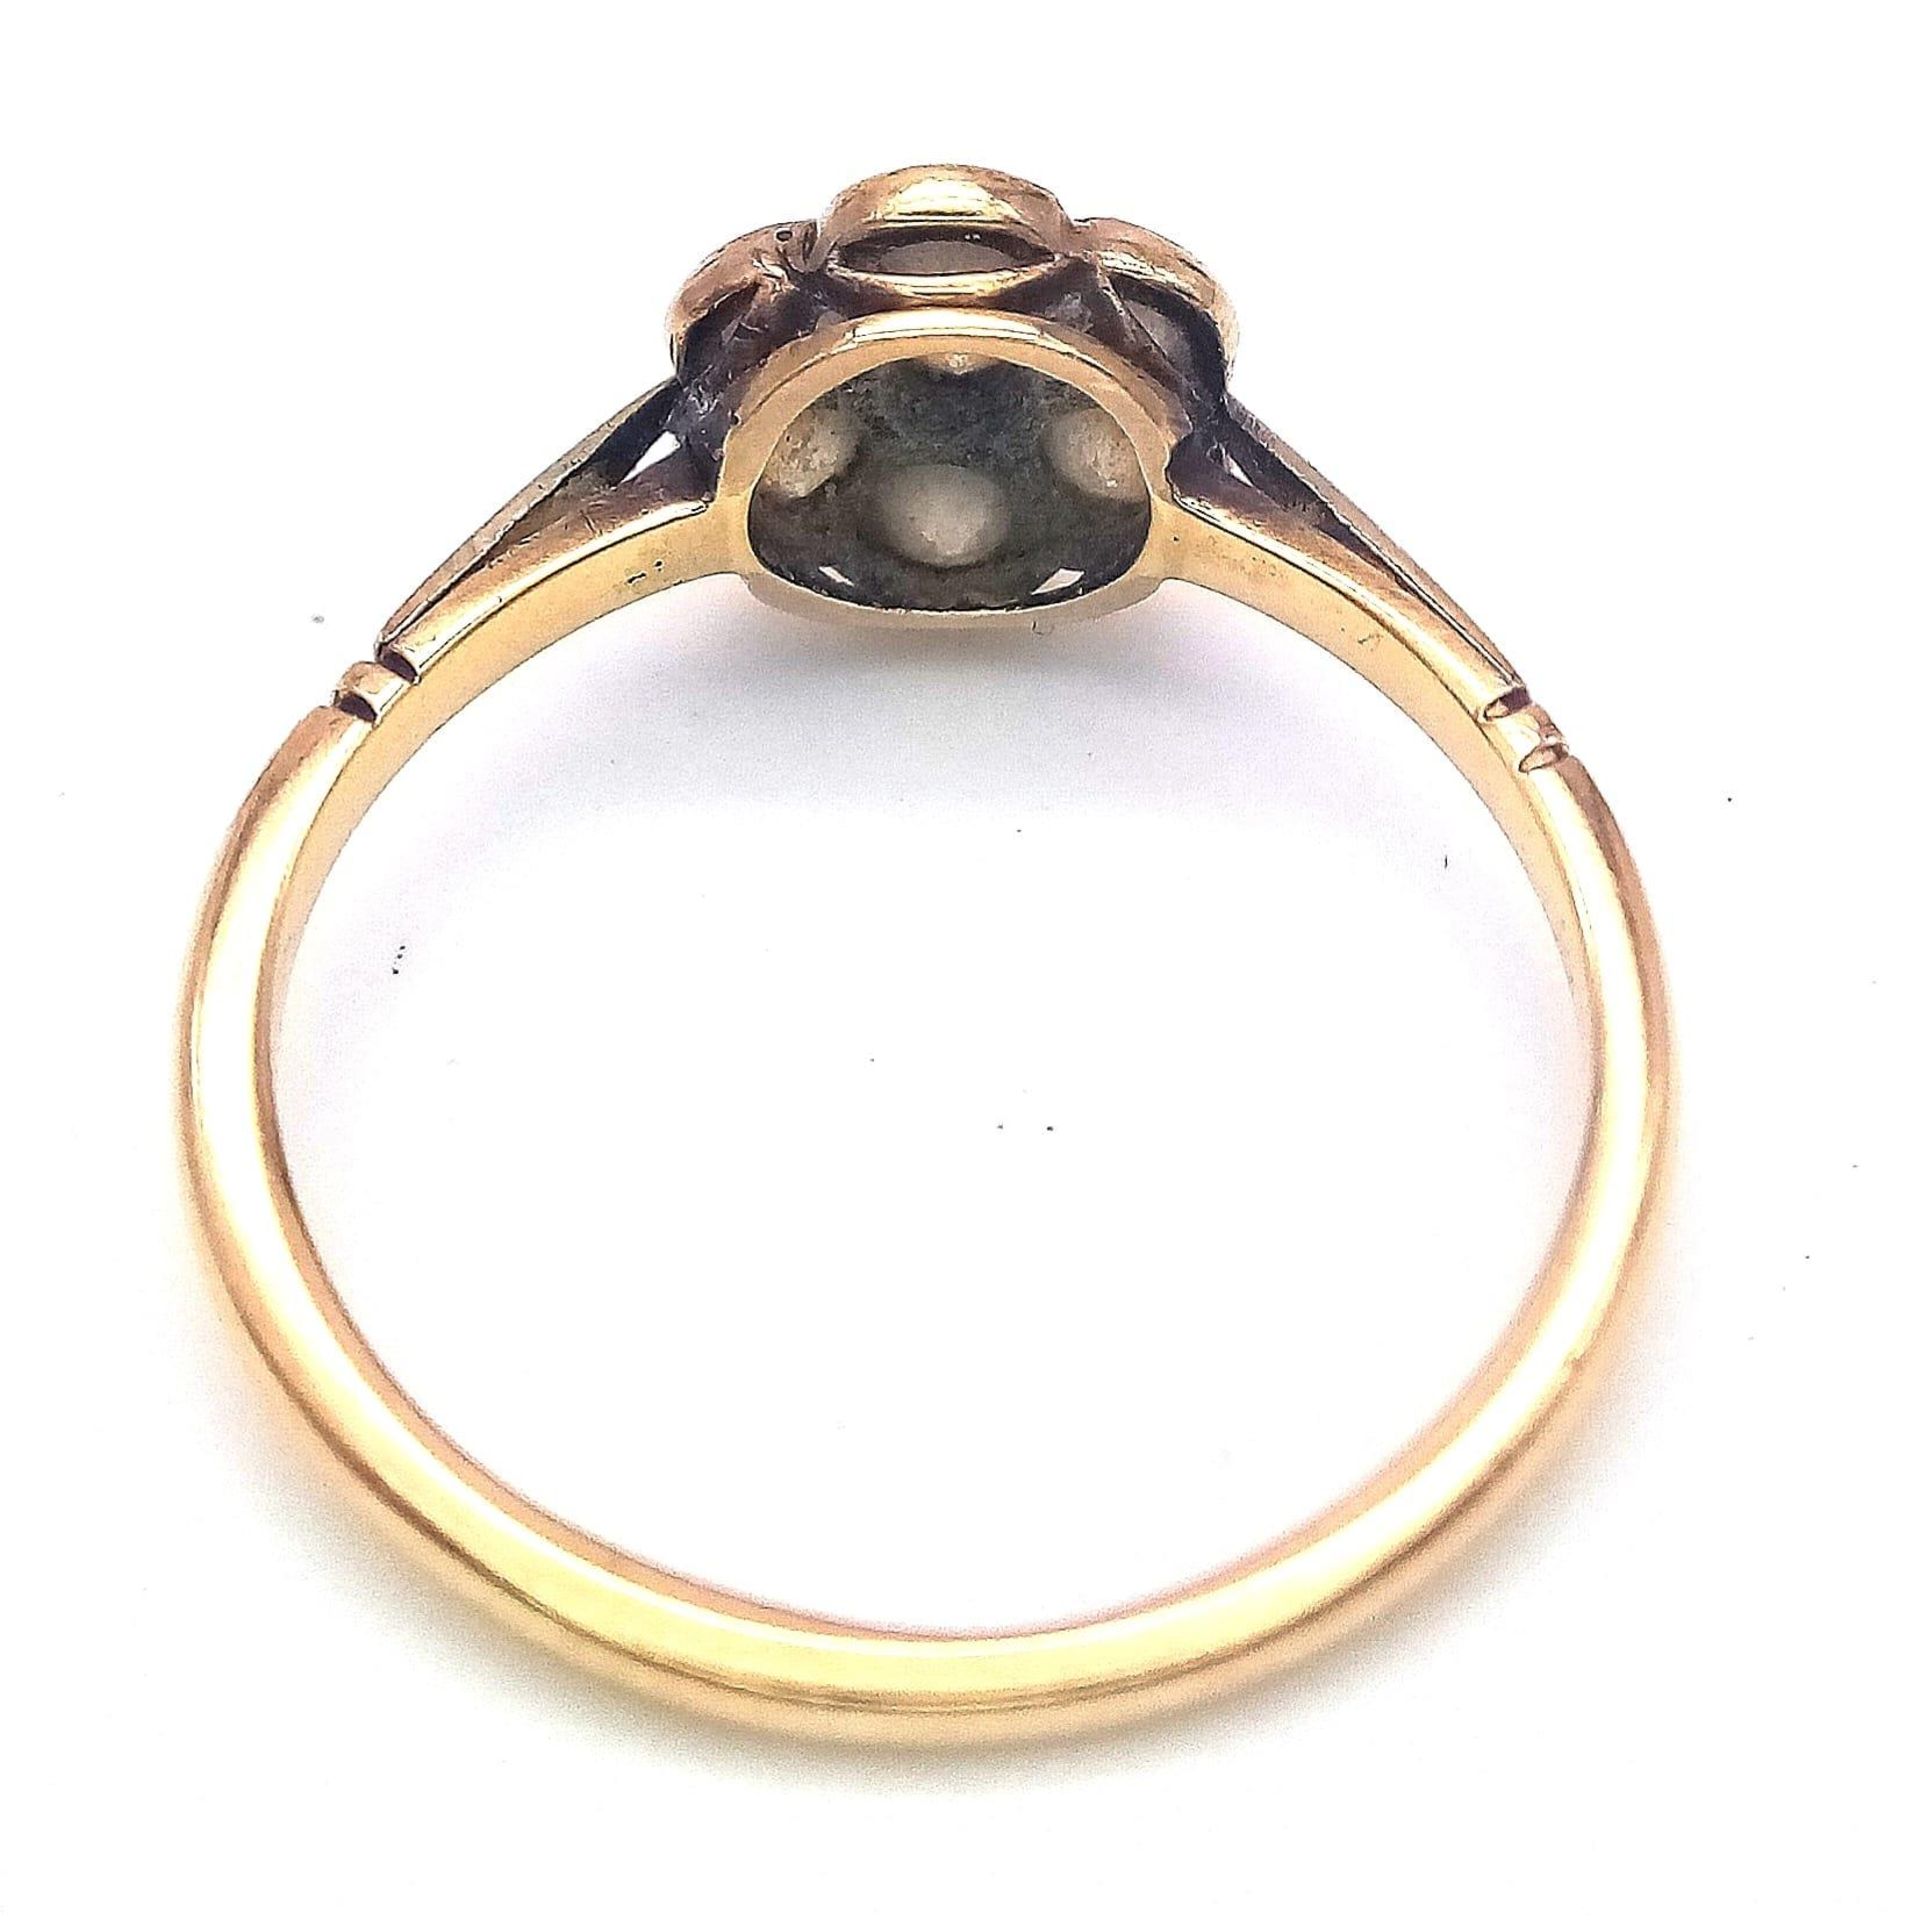 A Vintage 18K Yellow Gold Diamond Ring. Seven round cut diamonds in a floral shape. Size P. 2.52g - Image 13 of 19